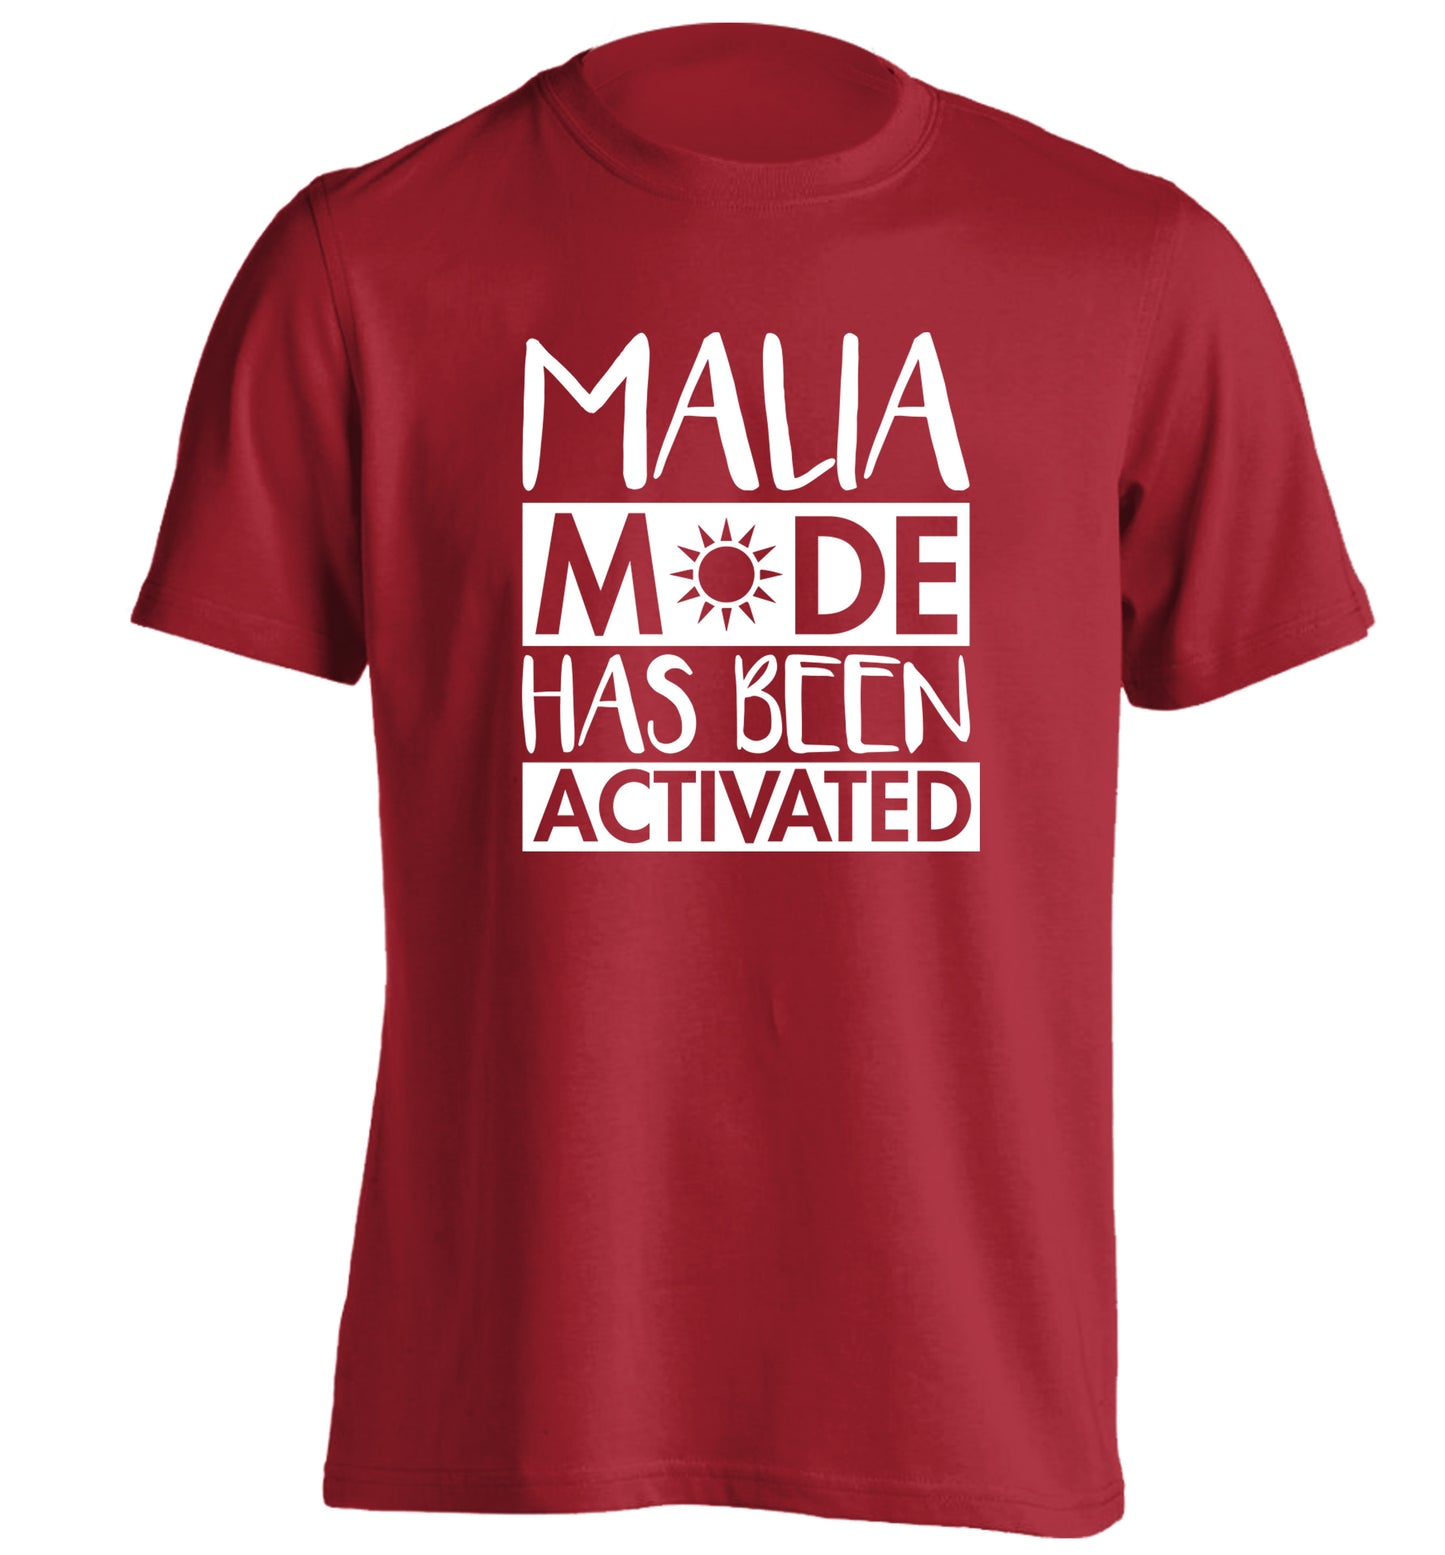 Malia mode has been activated adults unisex red Tshirt 2XL